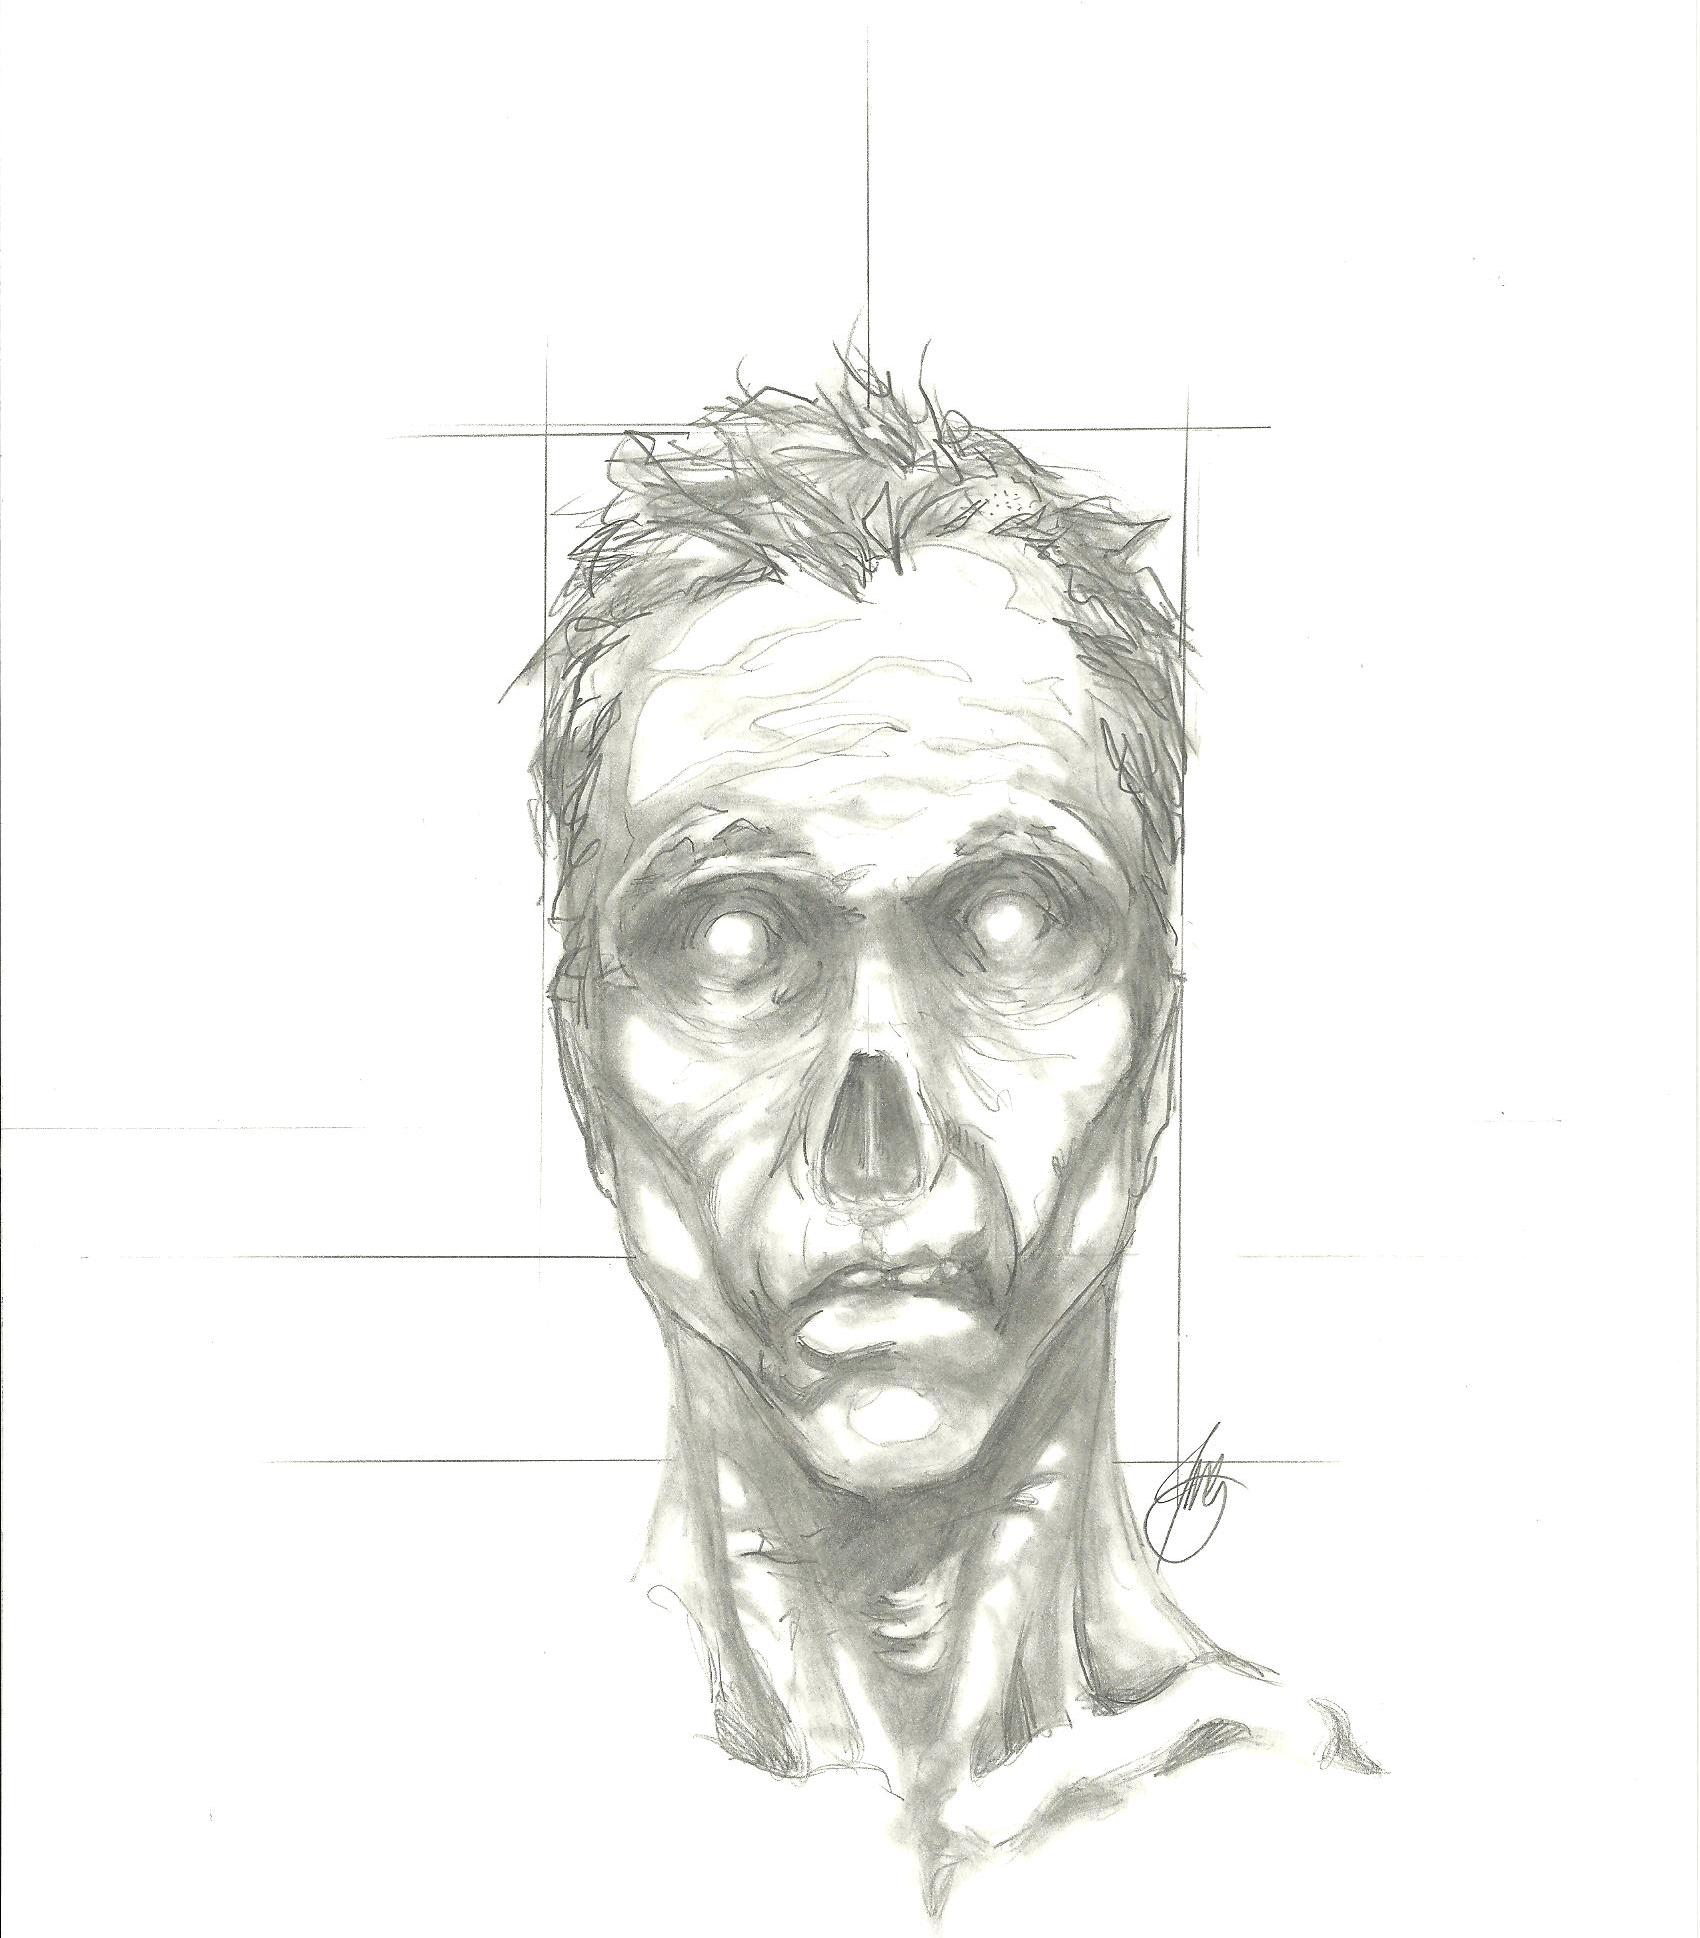 How to Draw Textures and Imperfections  Zombie Art  Robert Marzullo   Skillshare